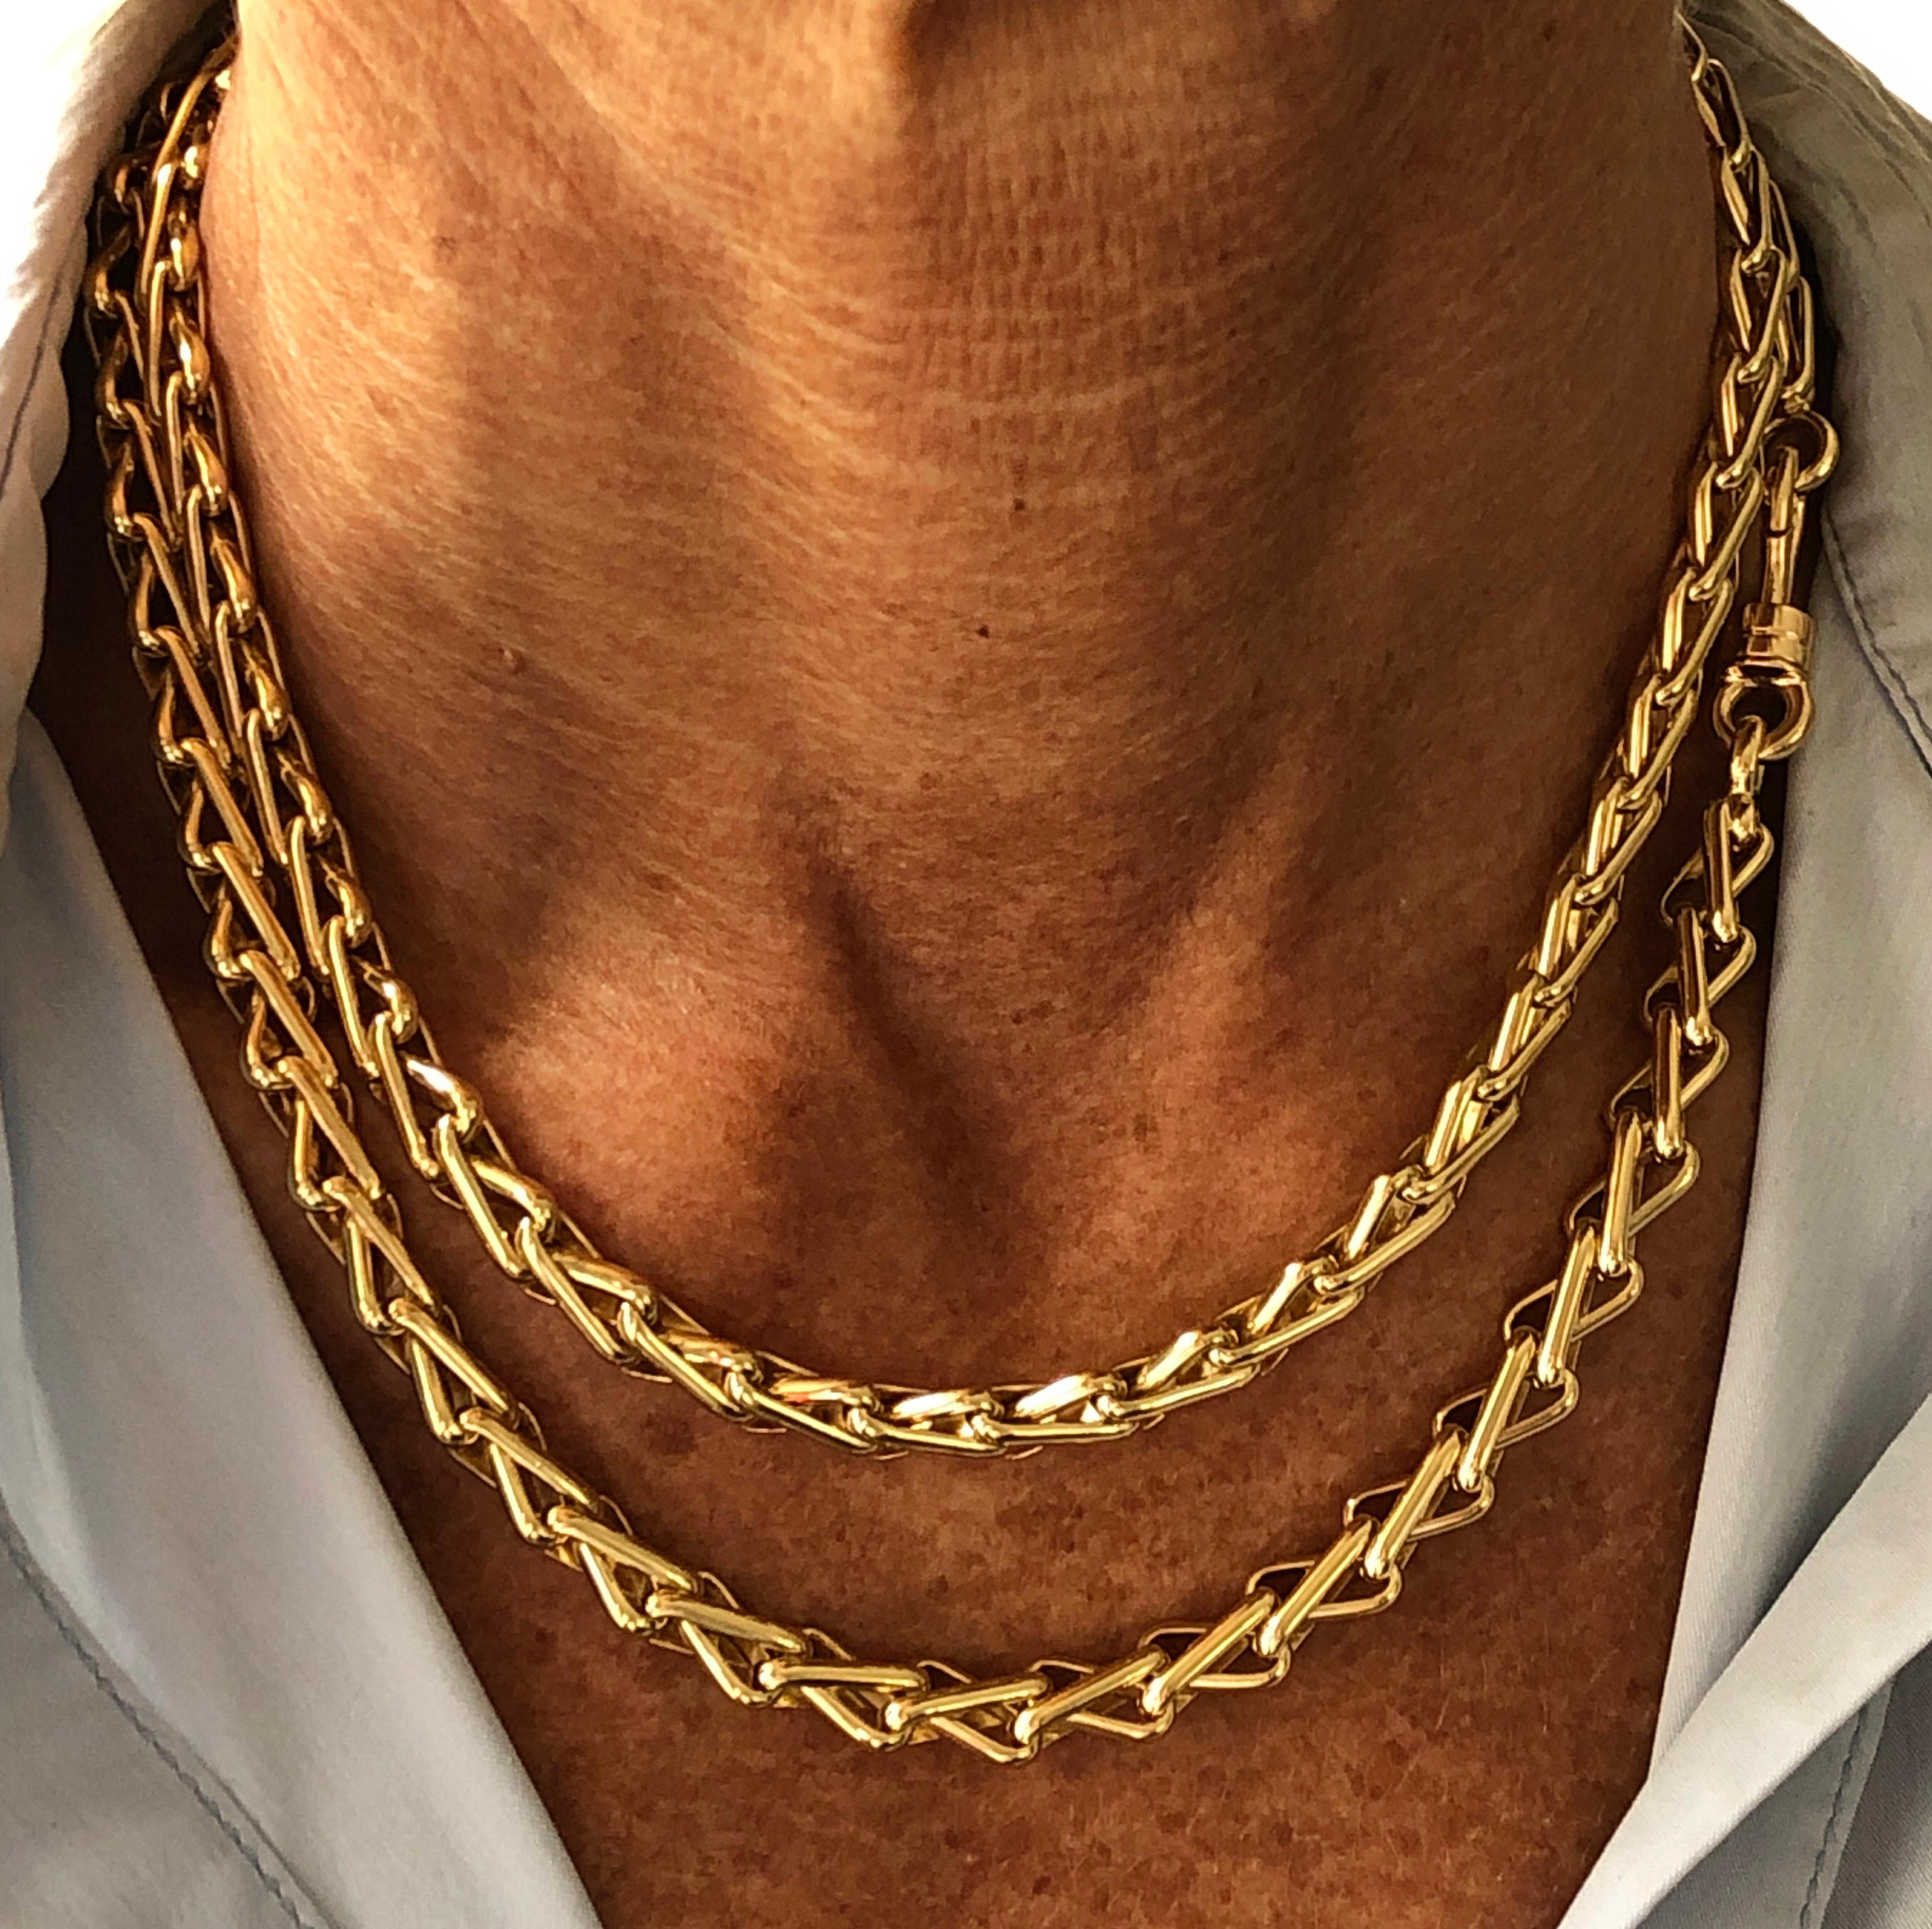 Original 1980 One-of-a-Kind Pomellato 18K Solid Yellow Gold Long Chain Necklace 8